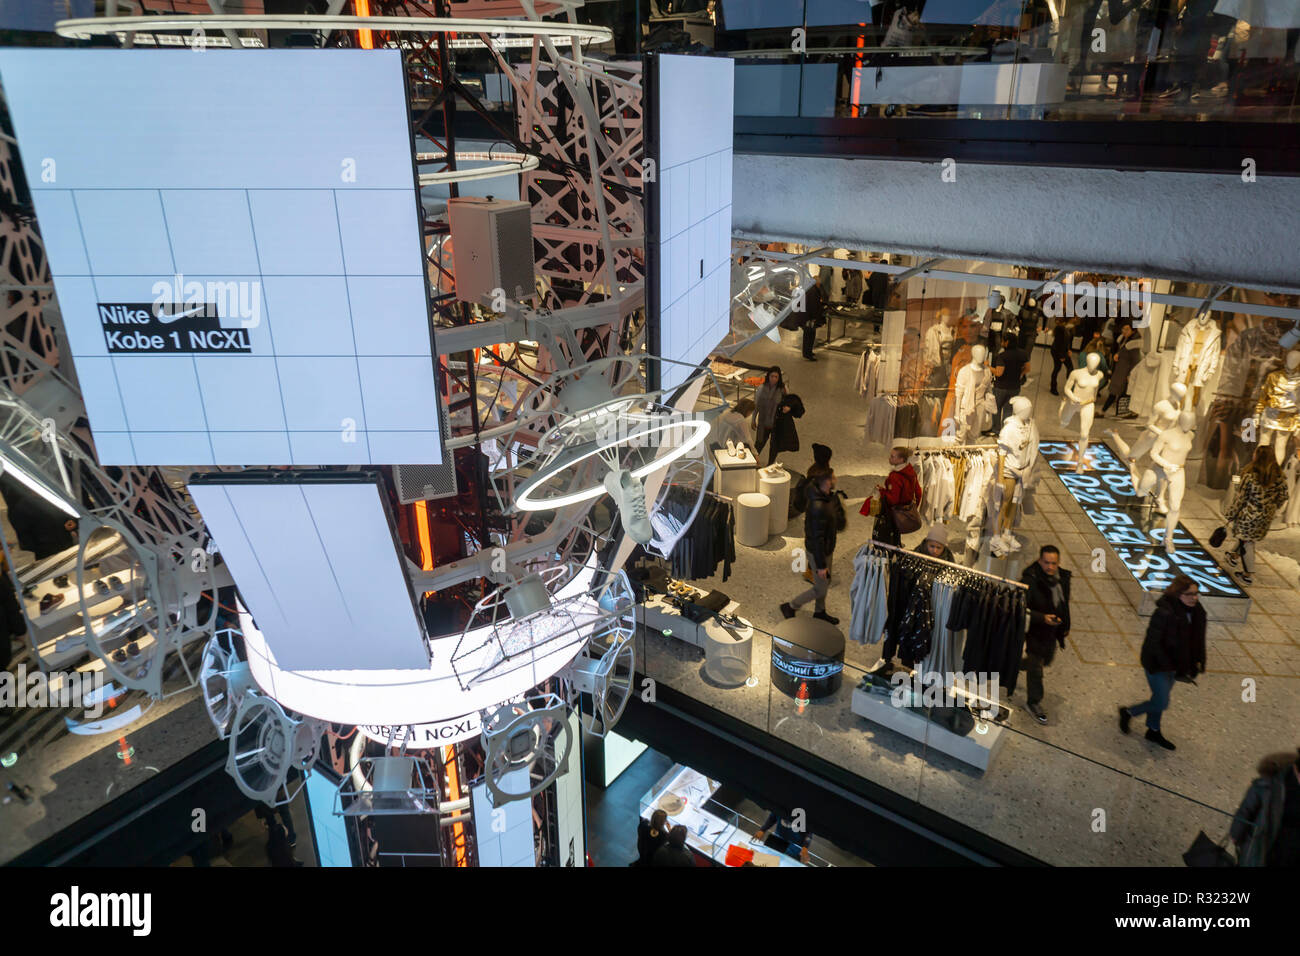 Shoppers and visitors flock to the newly opened Nike flagship store on  Fifth avenue in New York on Saturday, November 17, 2018. The 69,000 square  foot store, dubbed the "House of Innovation